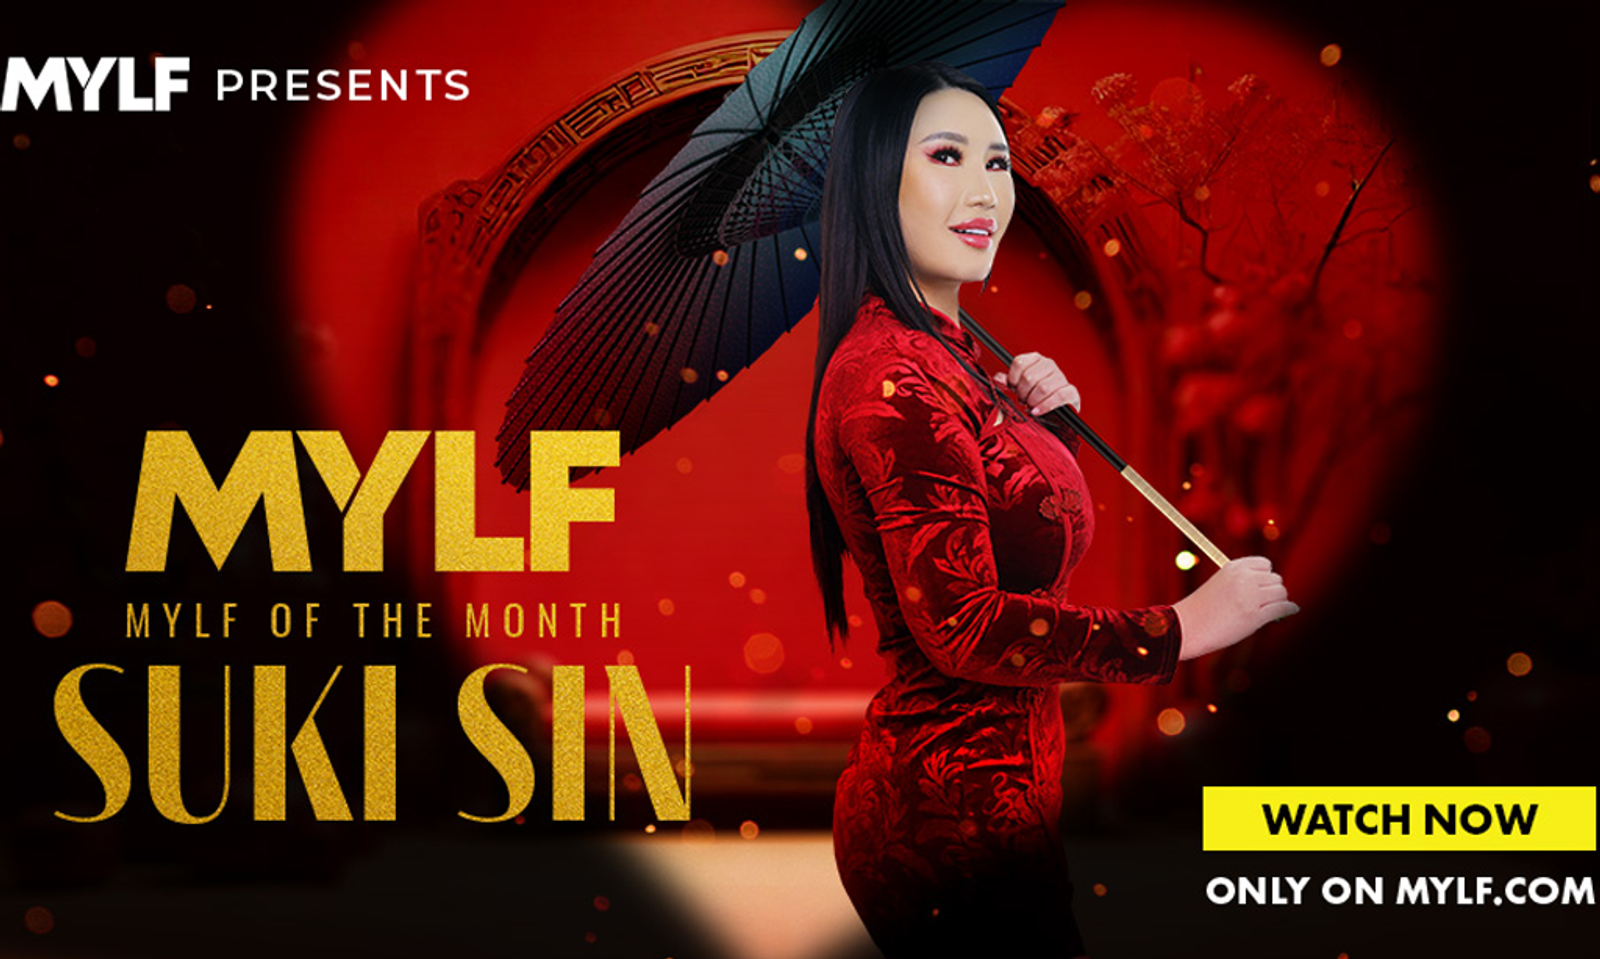 Suki Sin Named MYLF of the Month for February